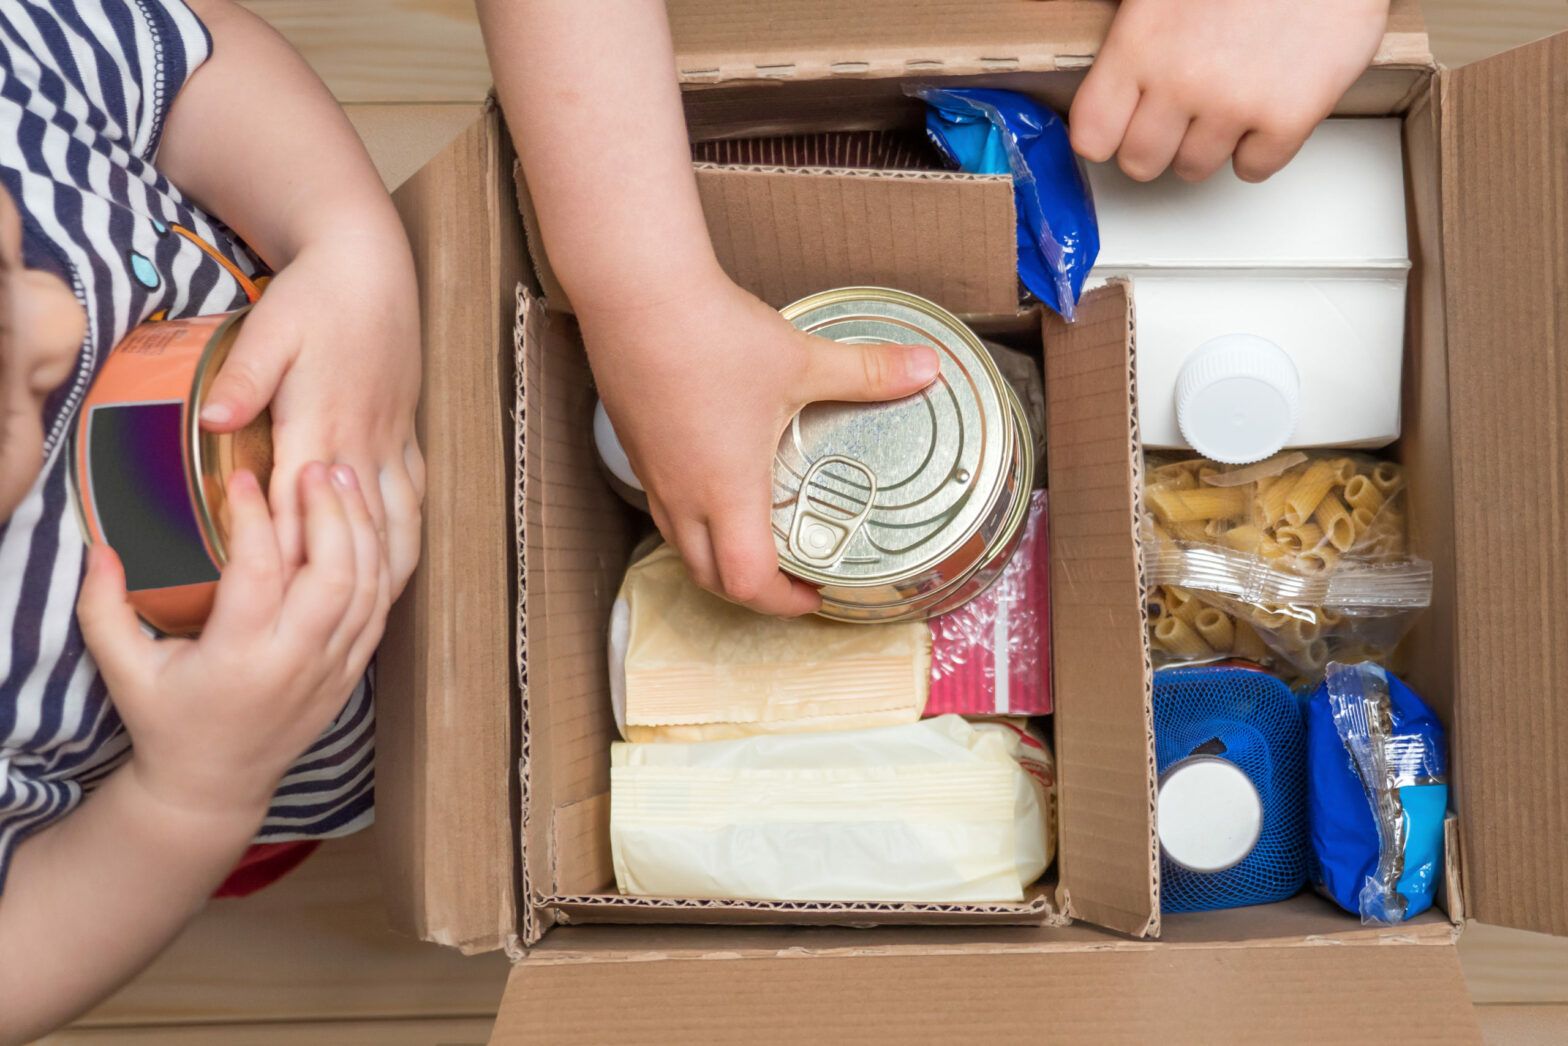 Investment manager coalition urge Compass to take action over inadequate food parcels